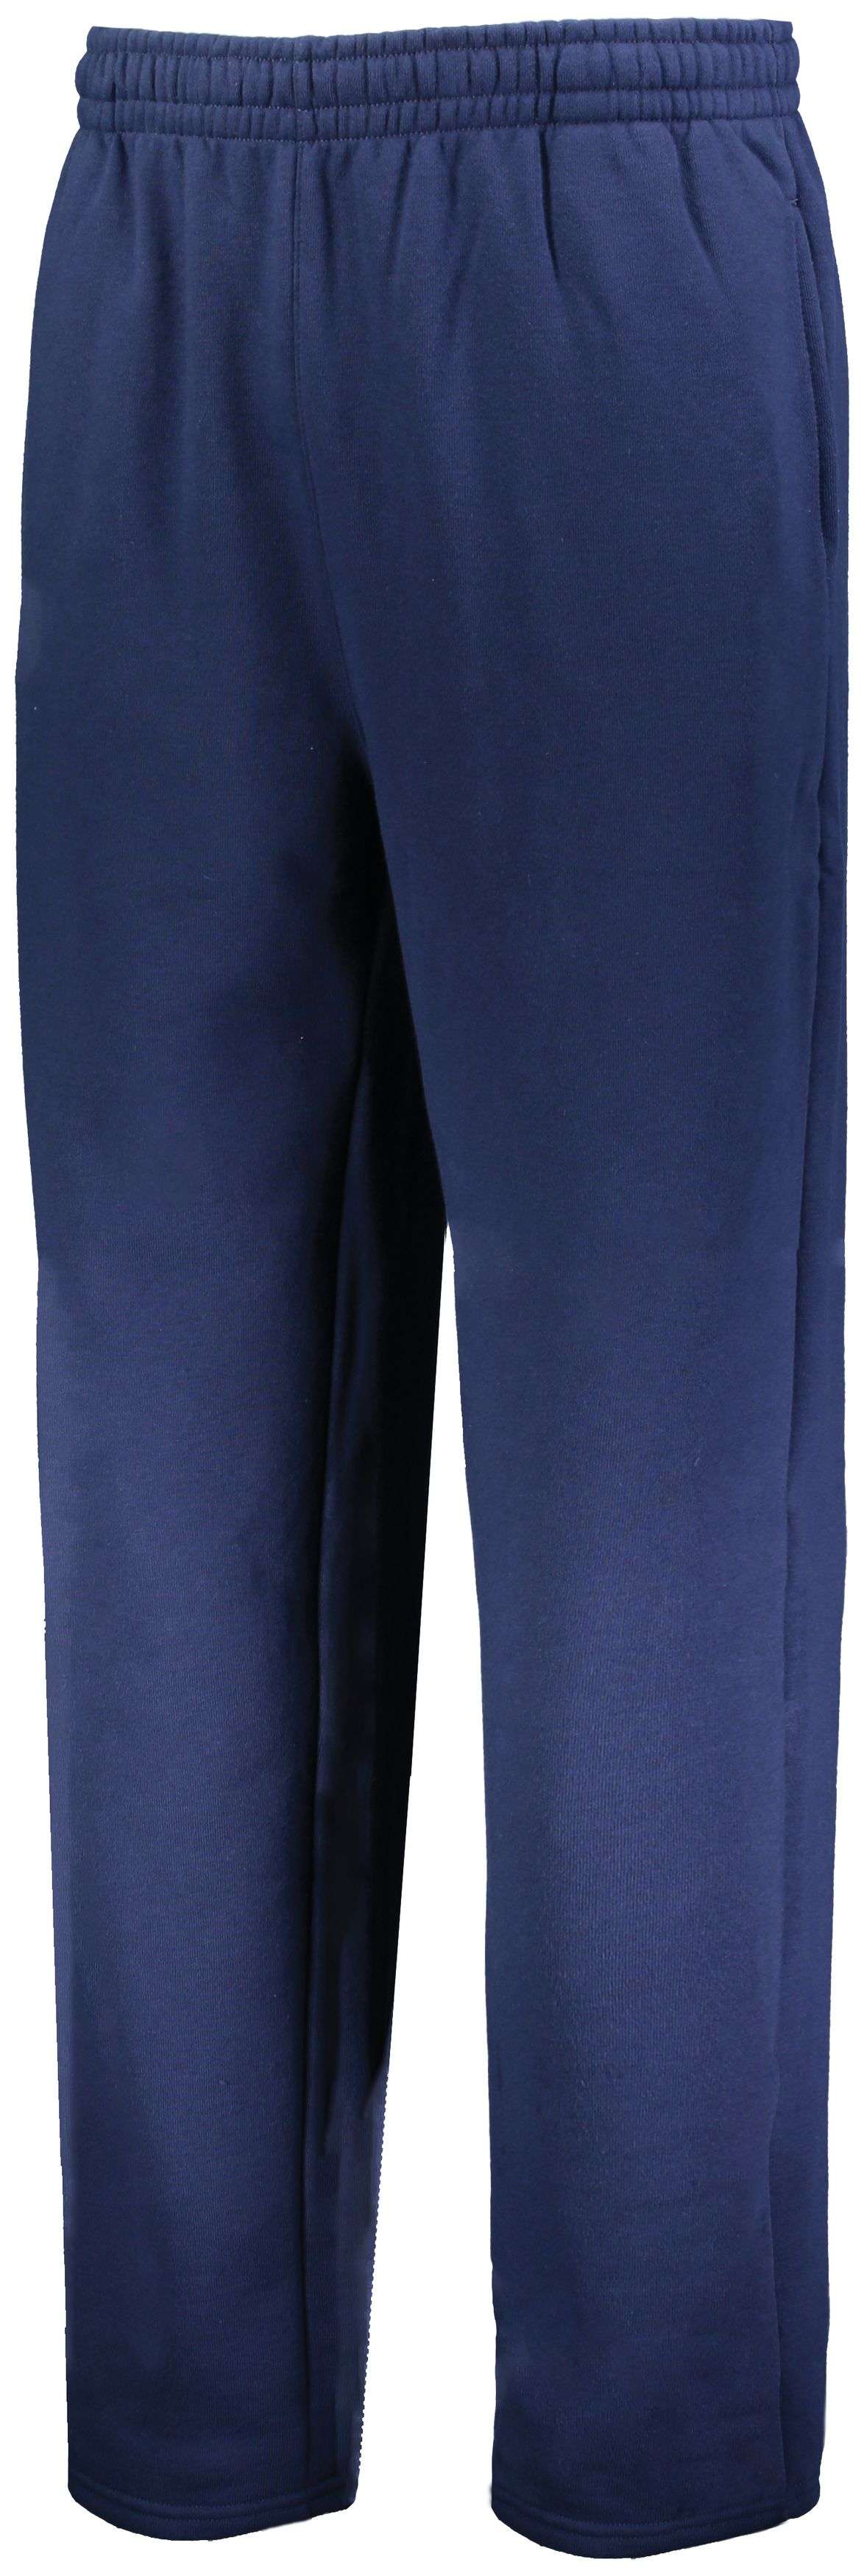 Russell 82ANSM Mens Open Bottom Easy Care Sweatpant With Pockets